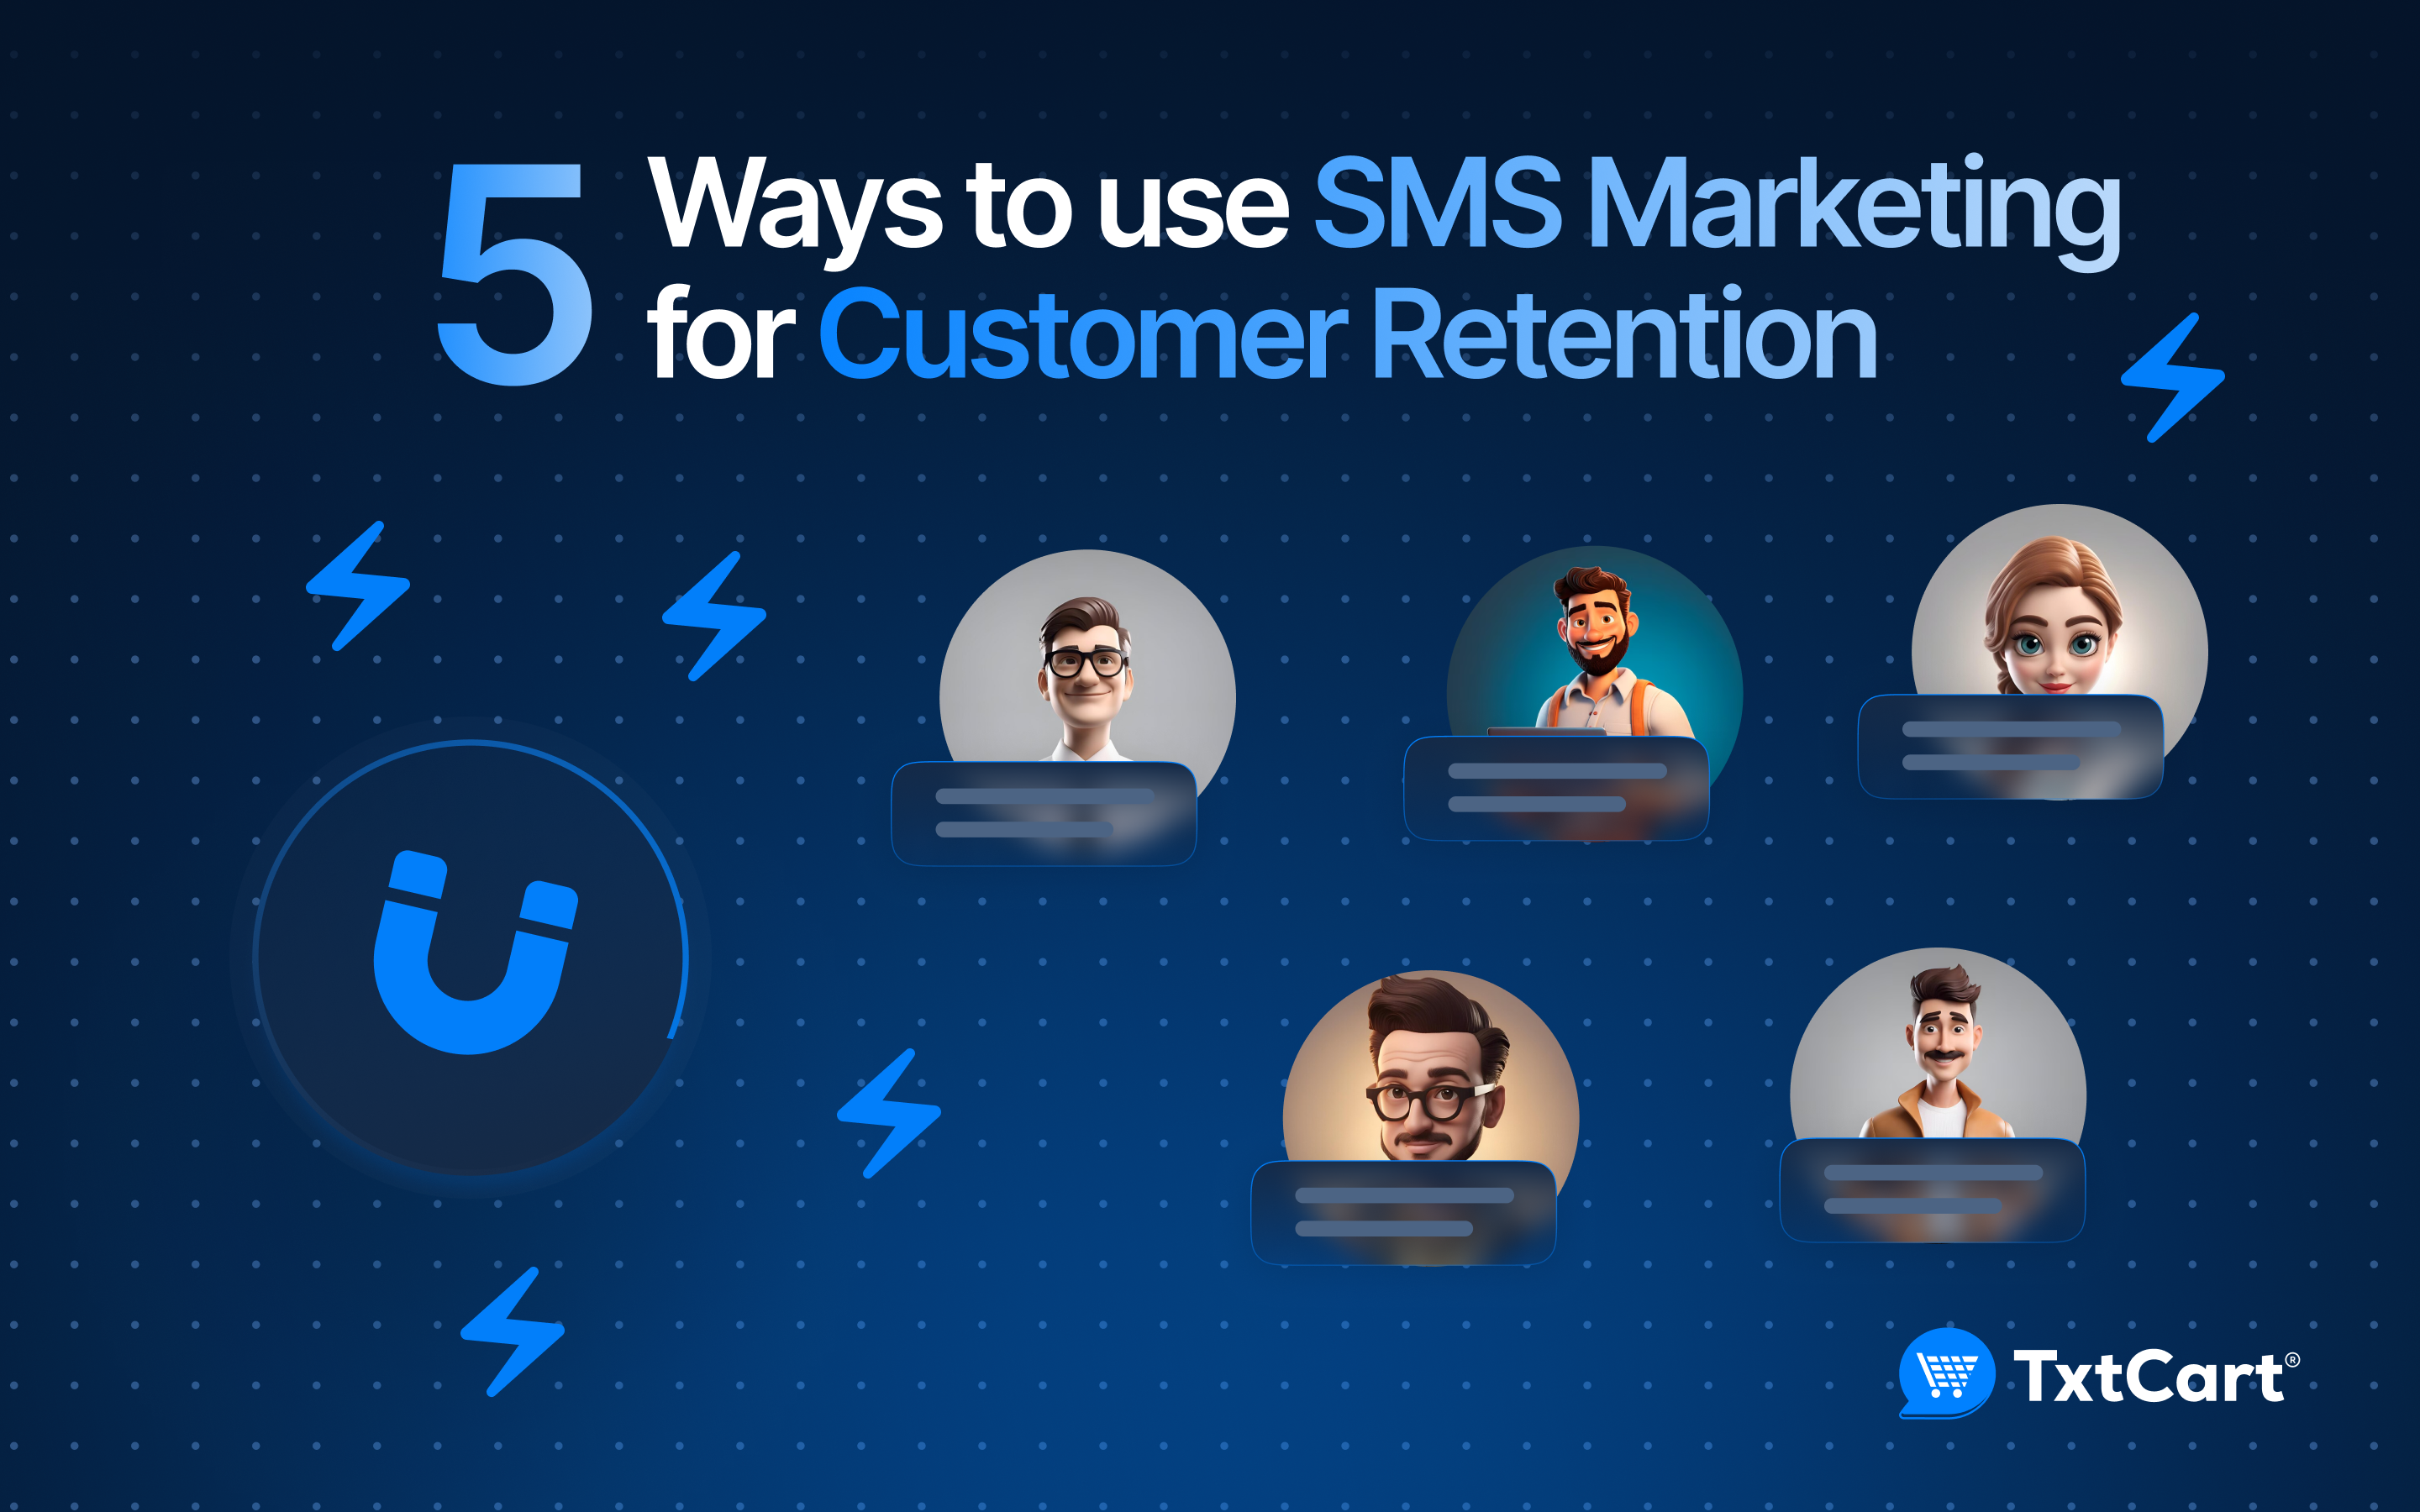 5 Ways to use SMS Marketing for Customer Retention